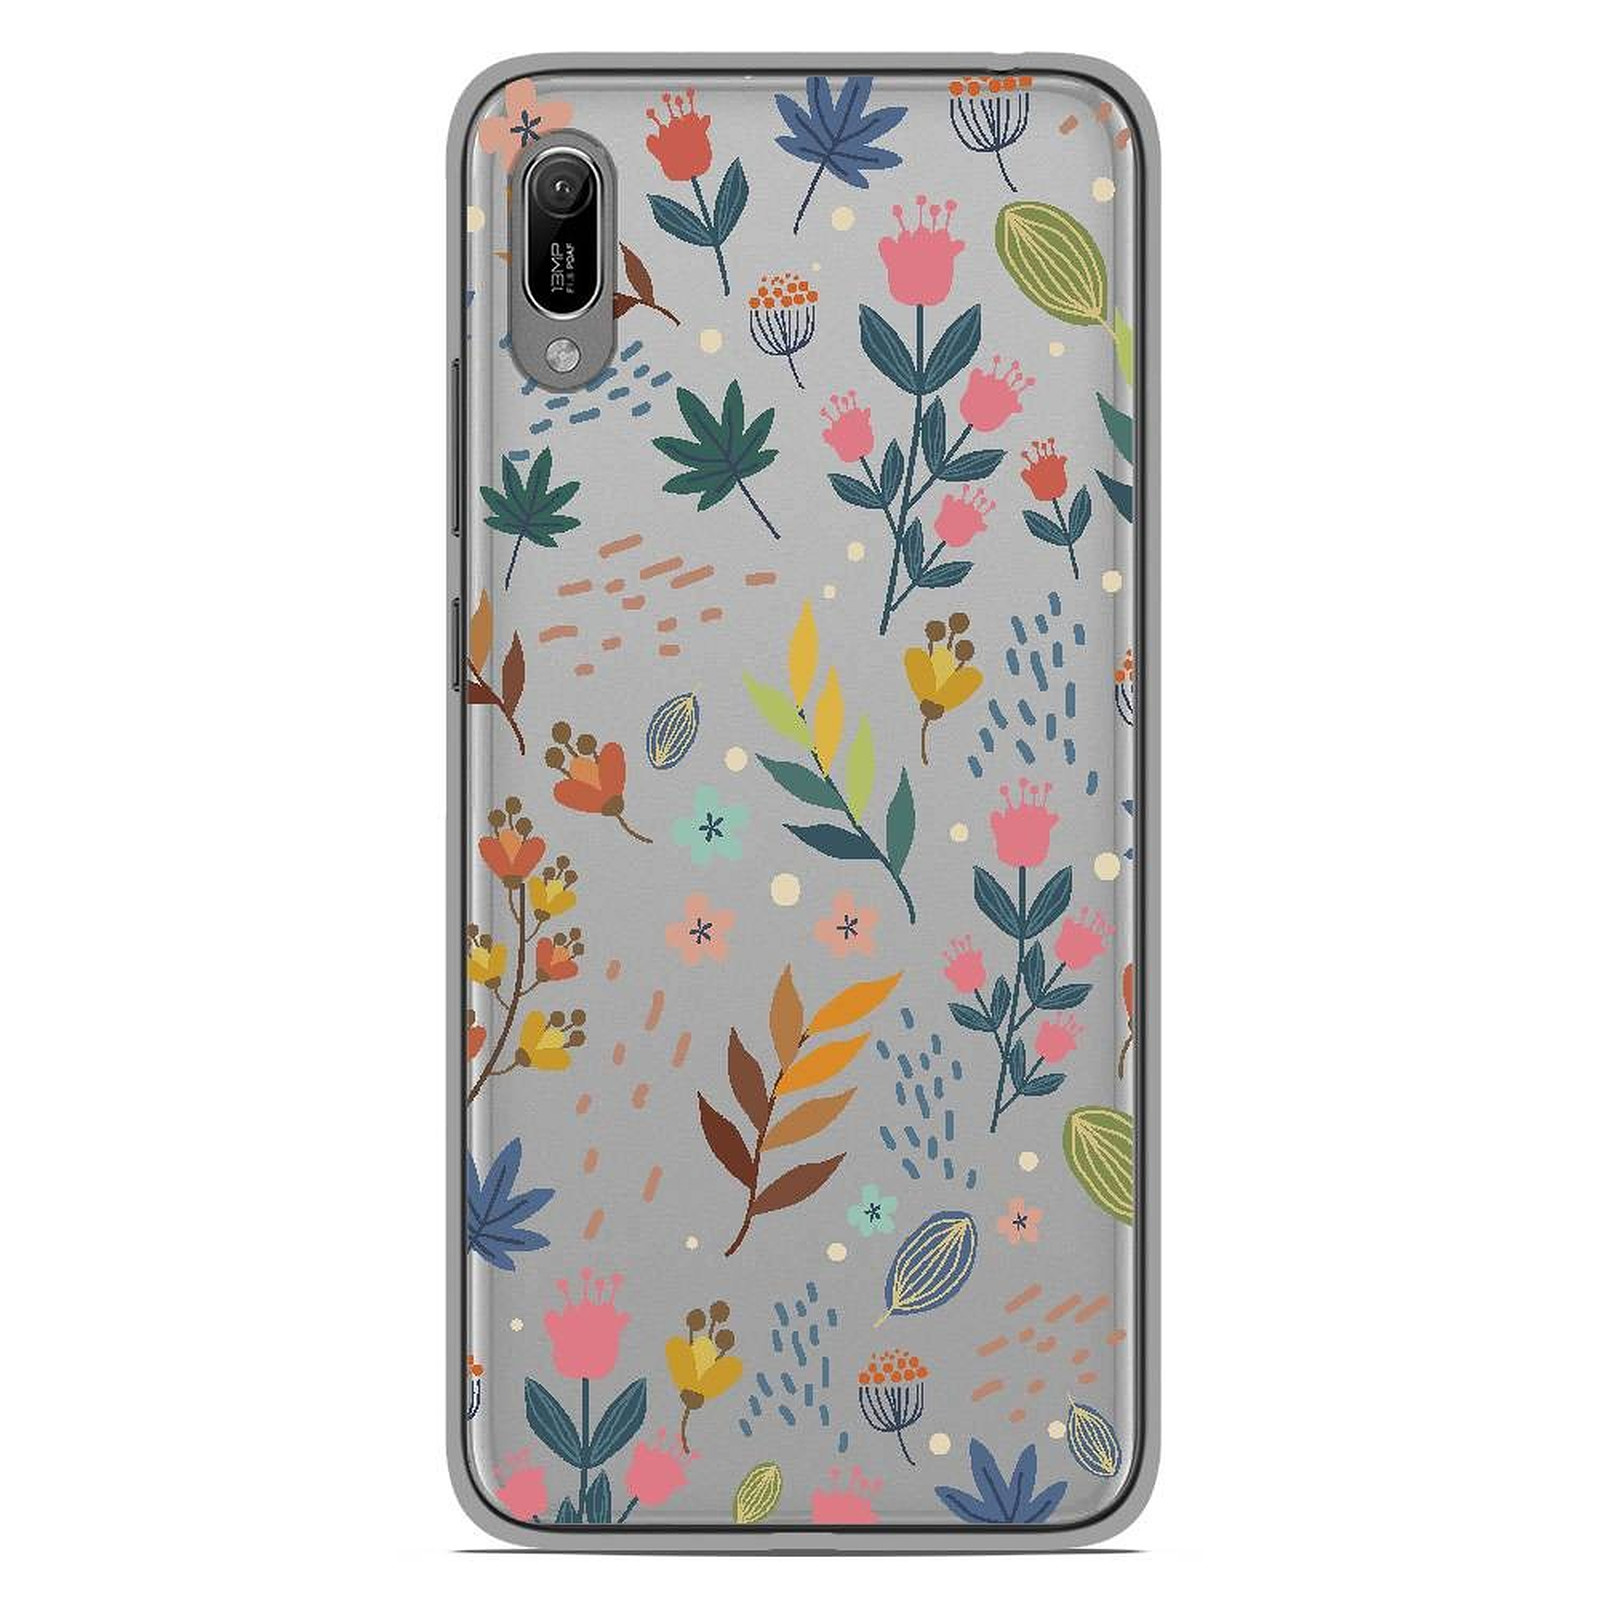 1001 Coques Coque silicone gel Huawei Y6 2019 motif Fleurs colorees - Coque telephone 1001Coques